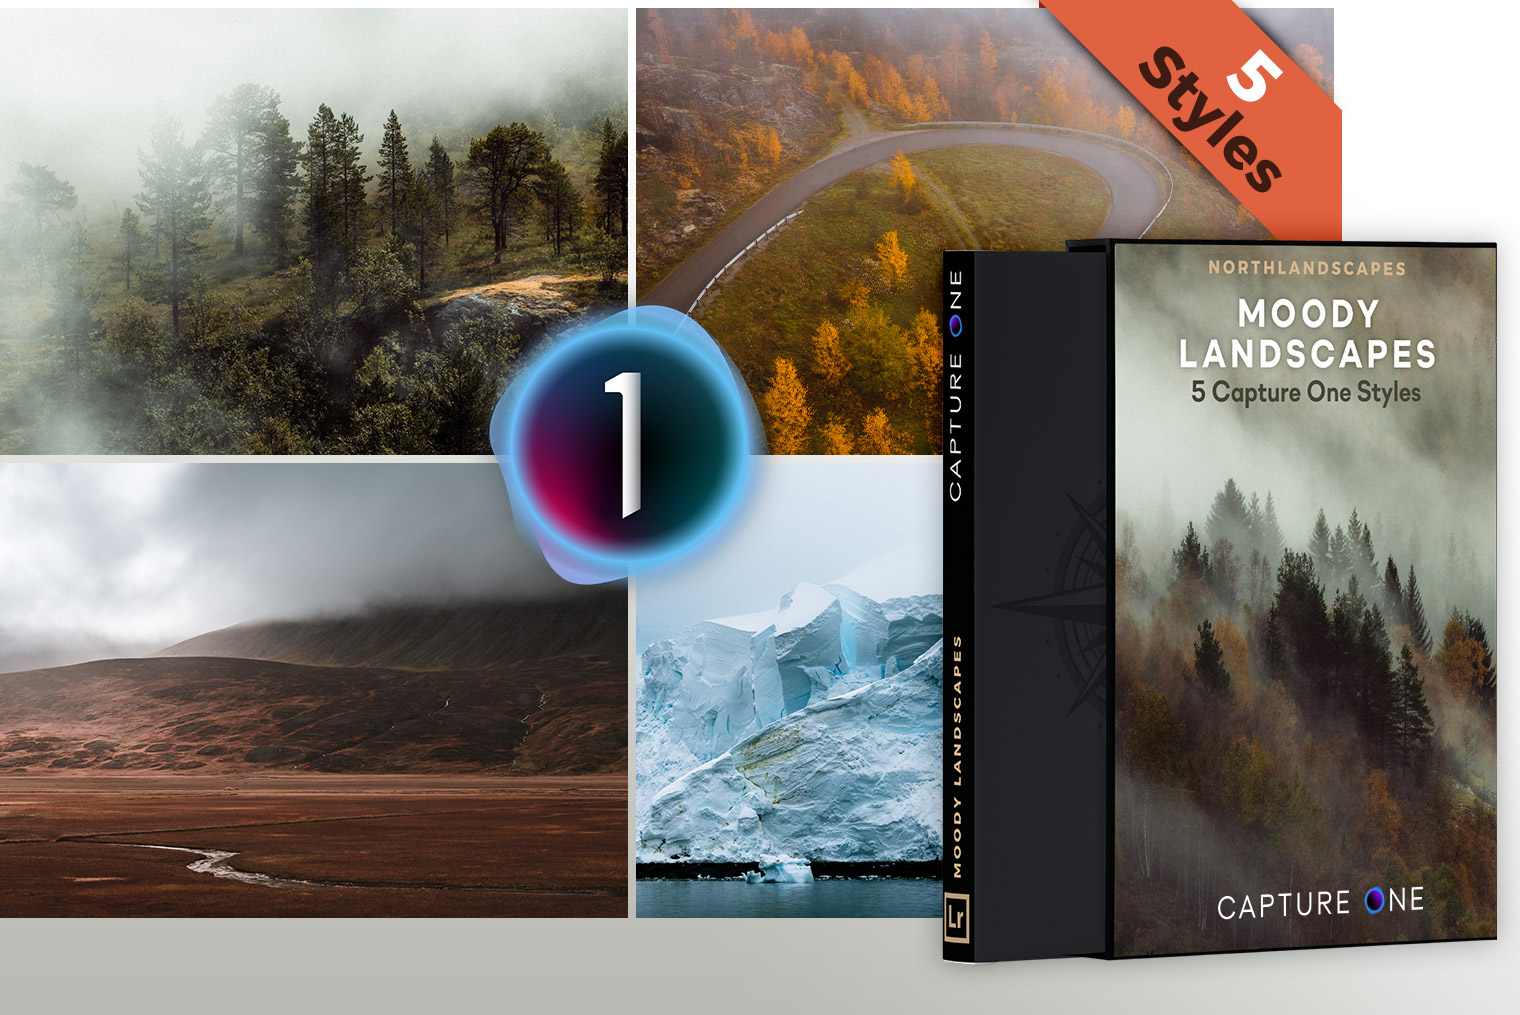 FREE Capture One Styles for Moody Landscape Photography